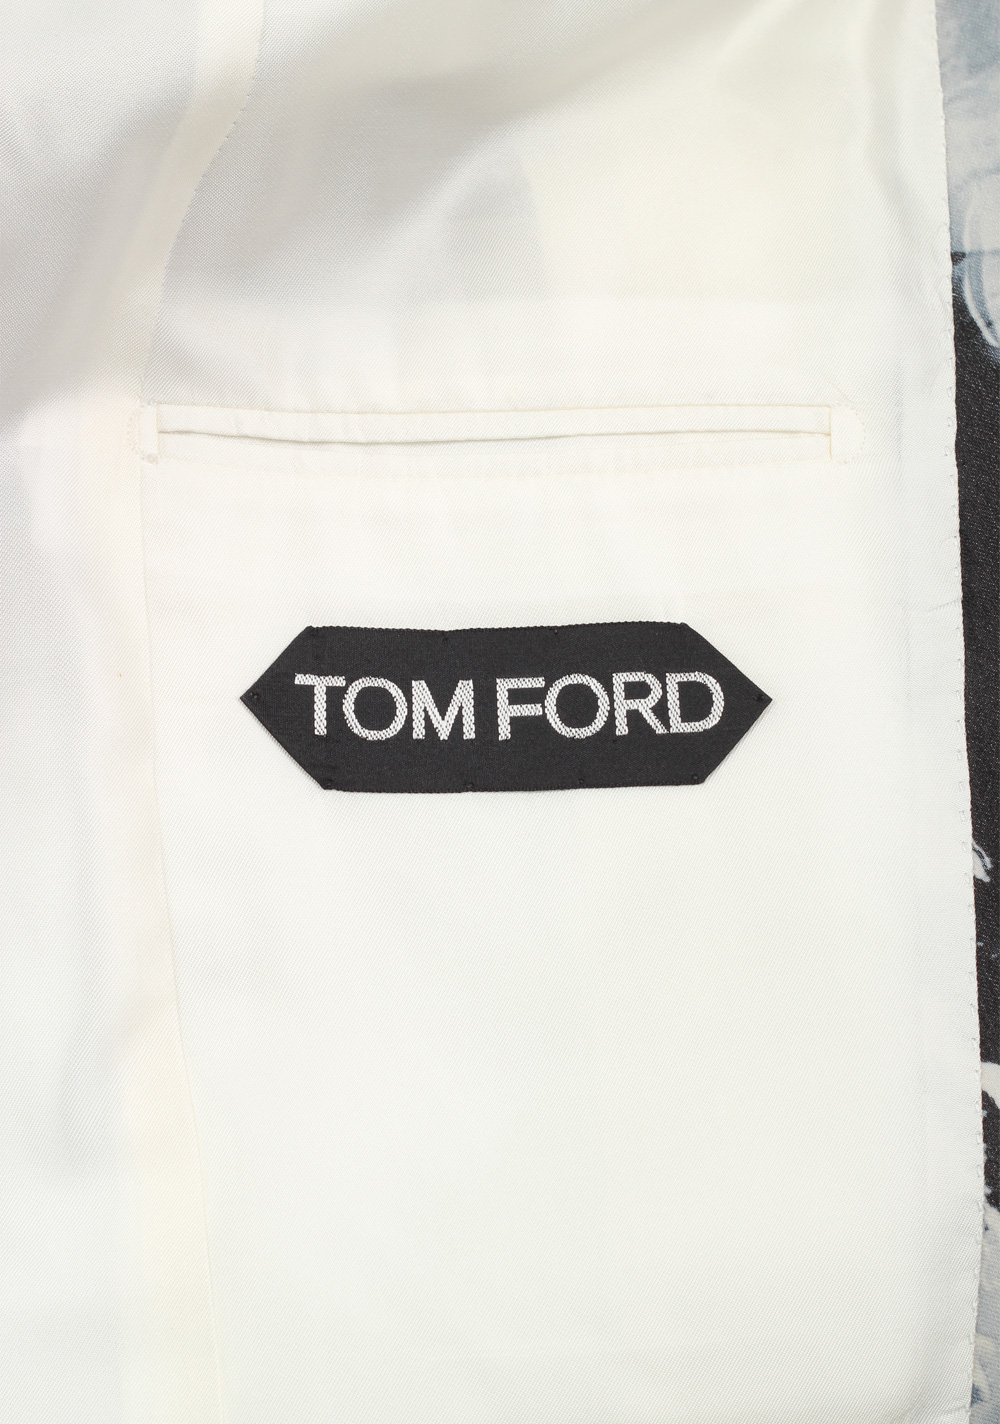 TOM FORD Atticus Painted Swirl Tuxedo Cocktail Dinner Jacket Size 48 / 38R U.S. | Costume Limité